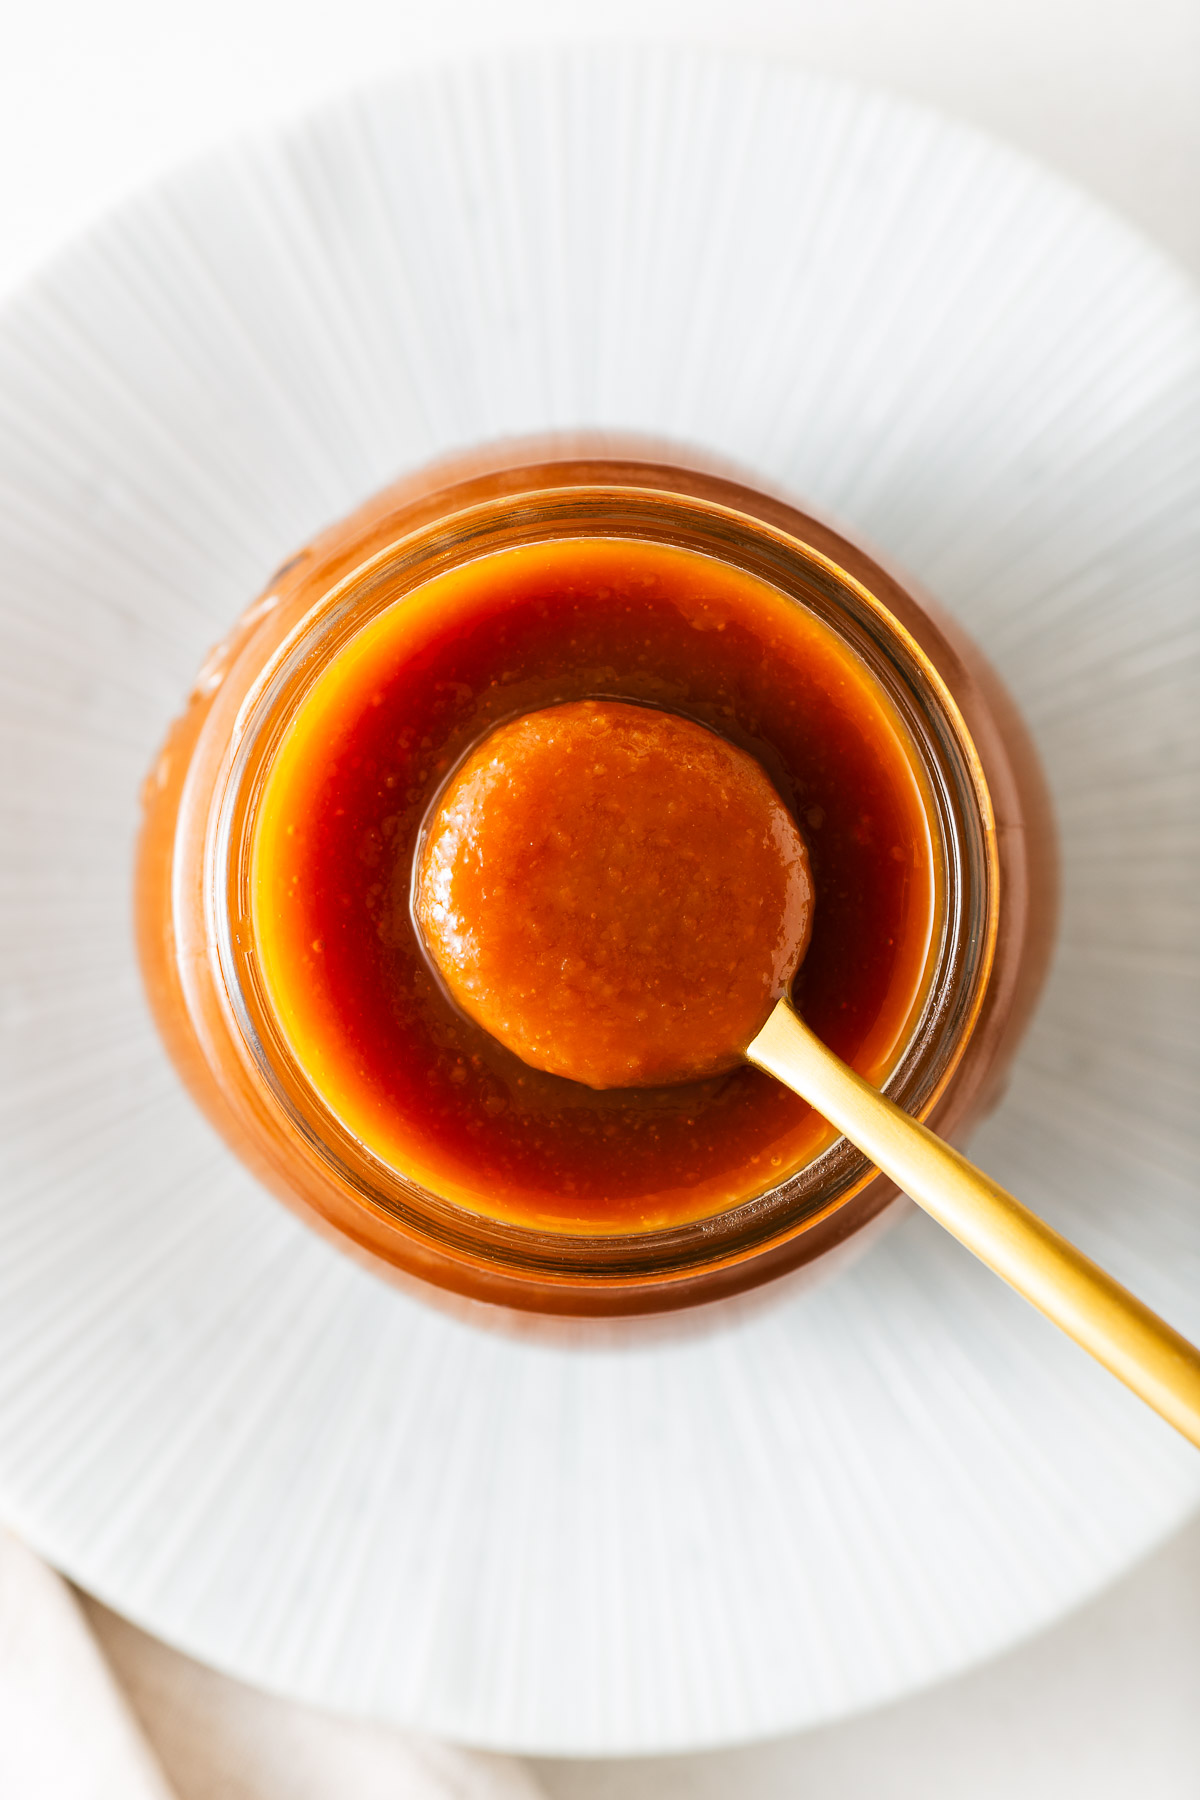 A jar of sweet miso sauce viewed from above.